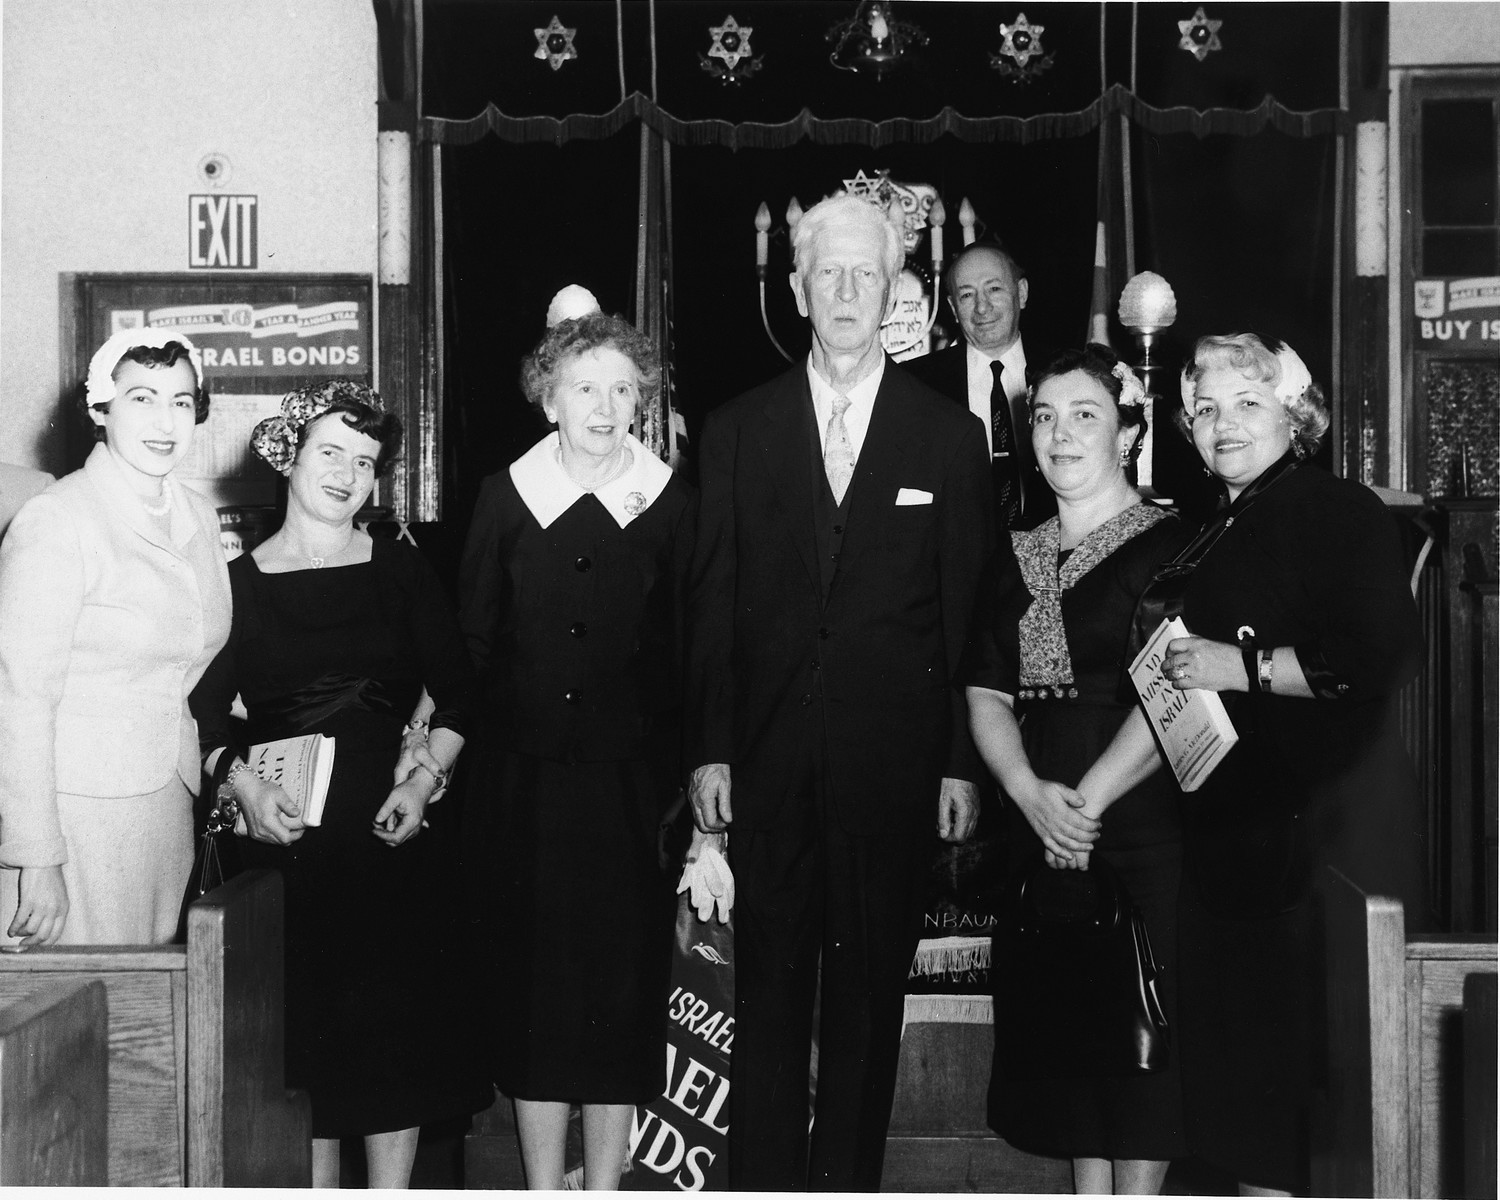 U.S. Ambassador to Israel James G. McDonald (center) poses with his wife (third from the left) and four other women at a State of Israel bonds drive at a synagogue in the U.S.

Two of the women hold copies of McDonald's 1951 memoir, "My Mission to Israel."